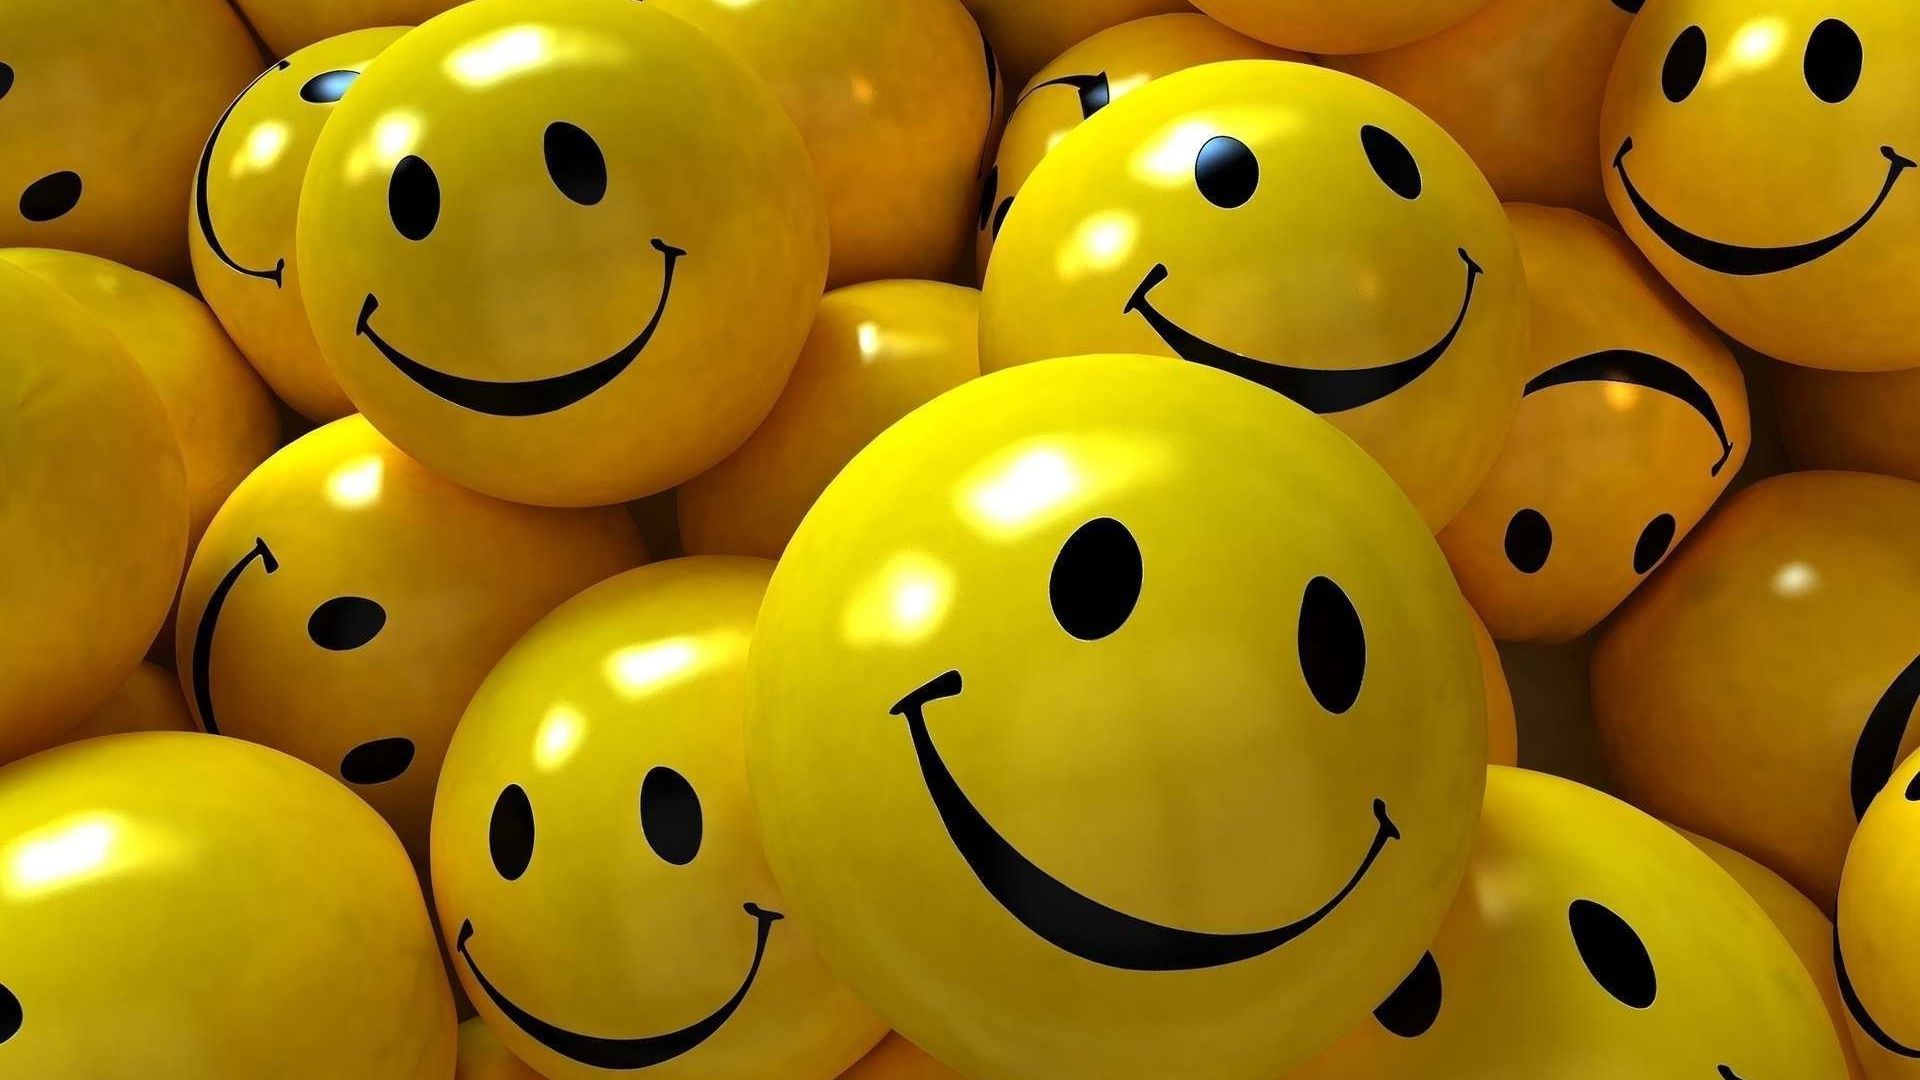 Desktop Wallpaper Yellow Smiley Face Ball Hd Image Picture Background  Xeodw1